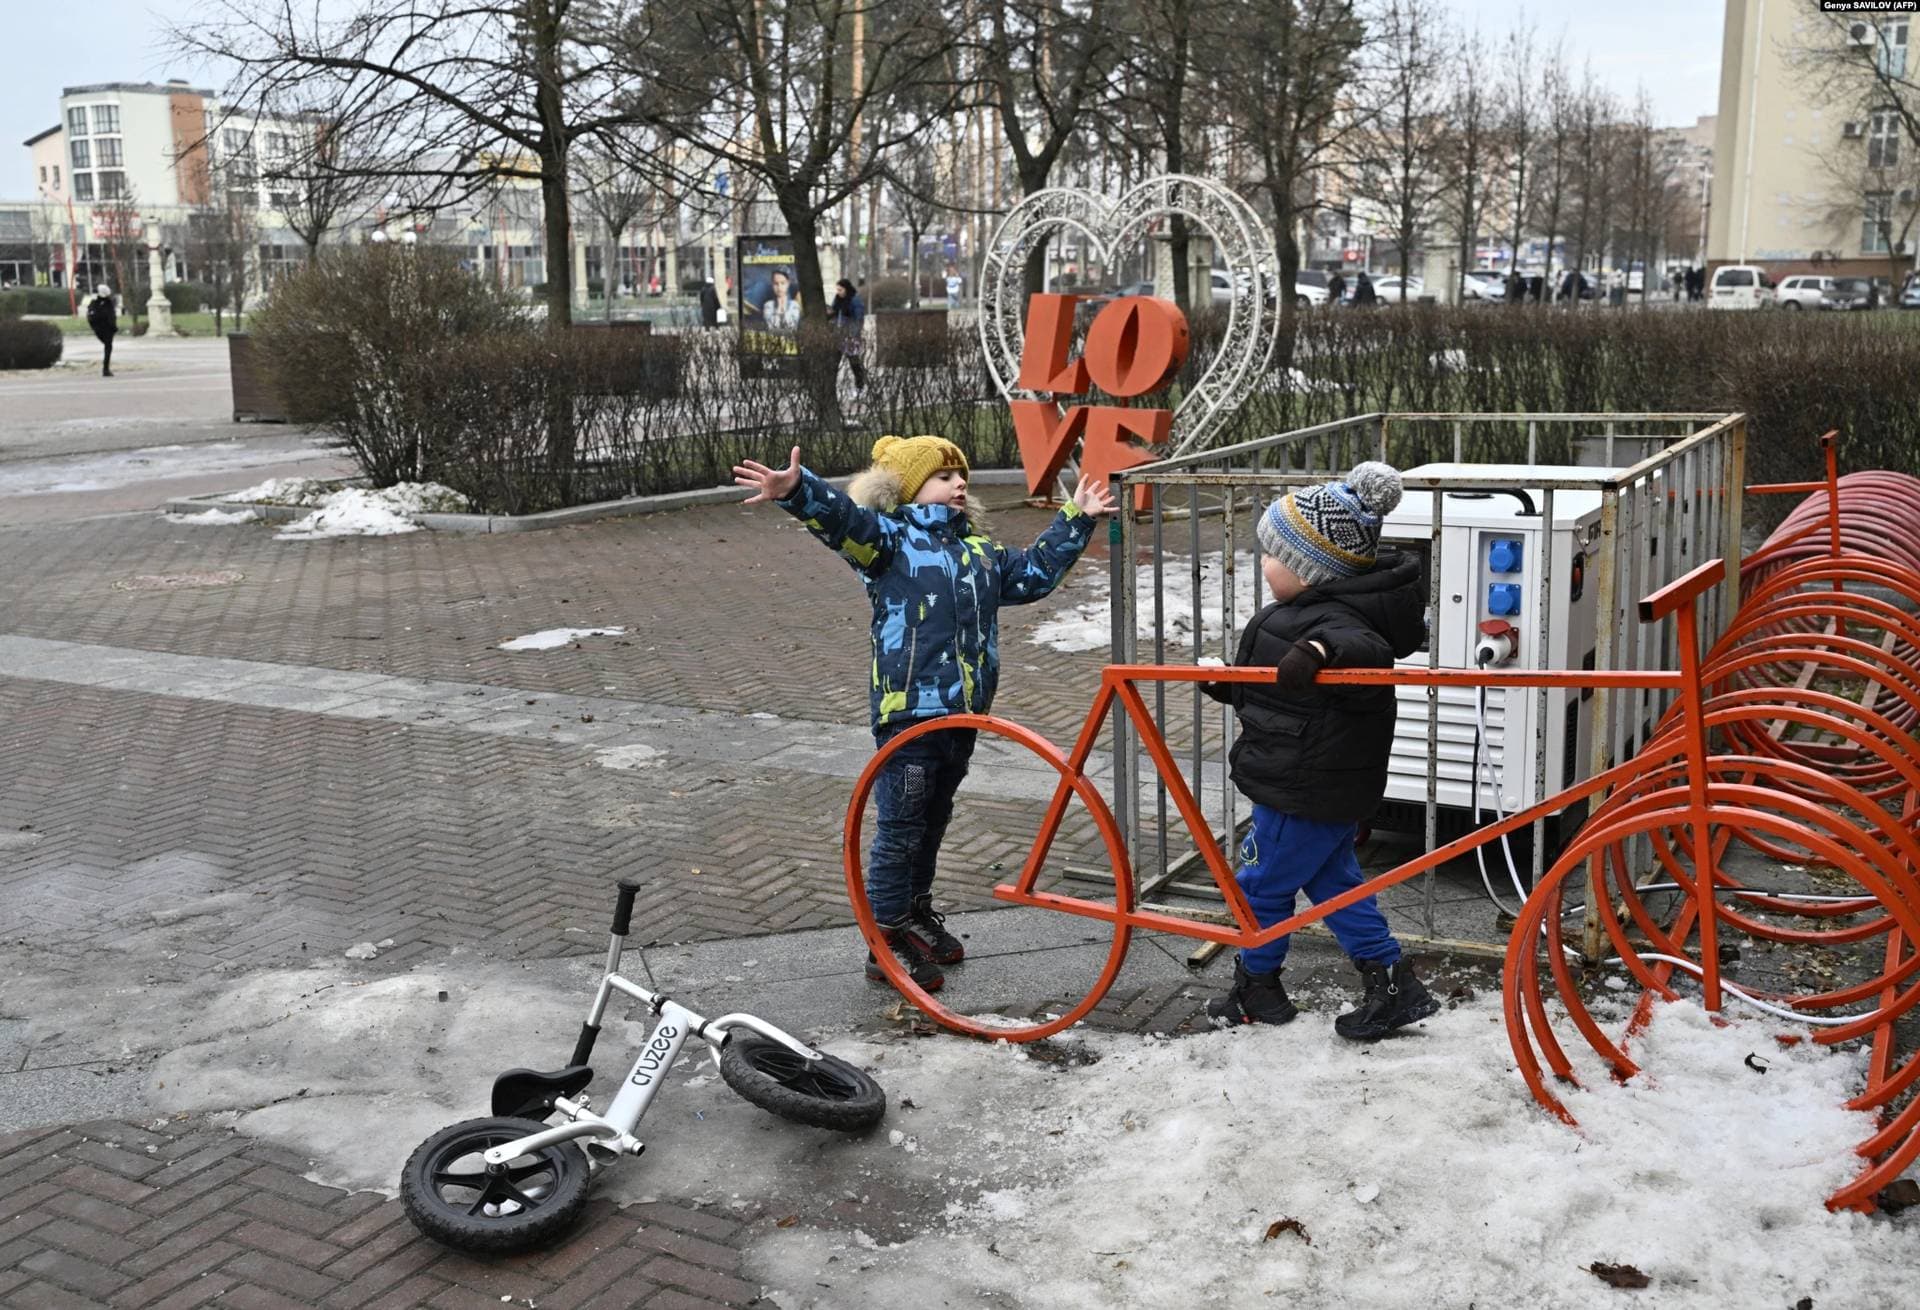 Children play near a generator in front of the library